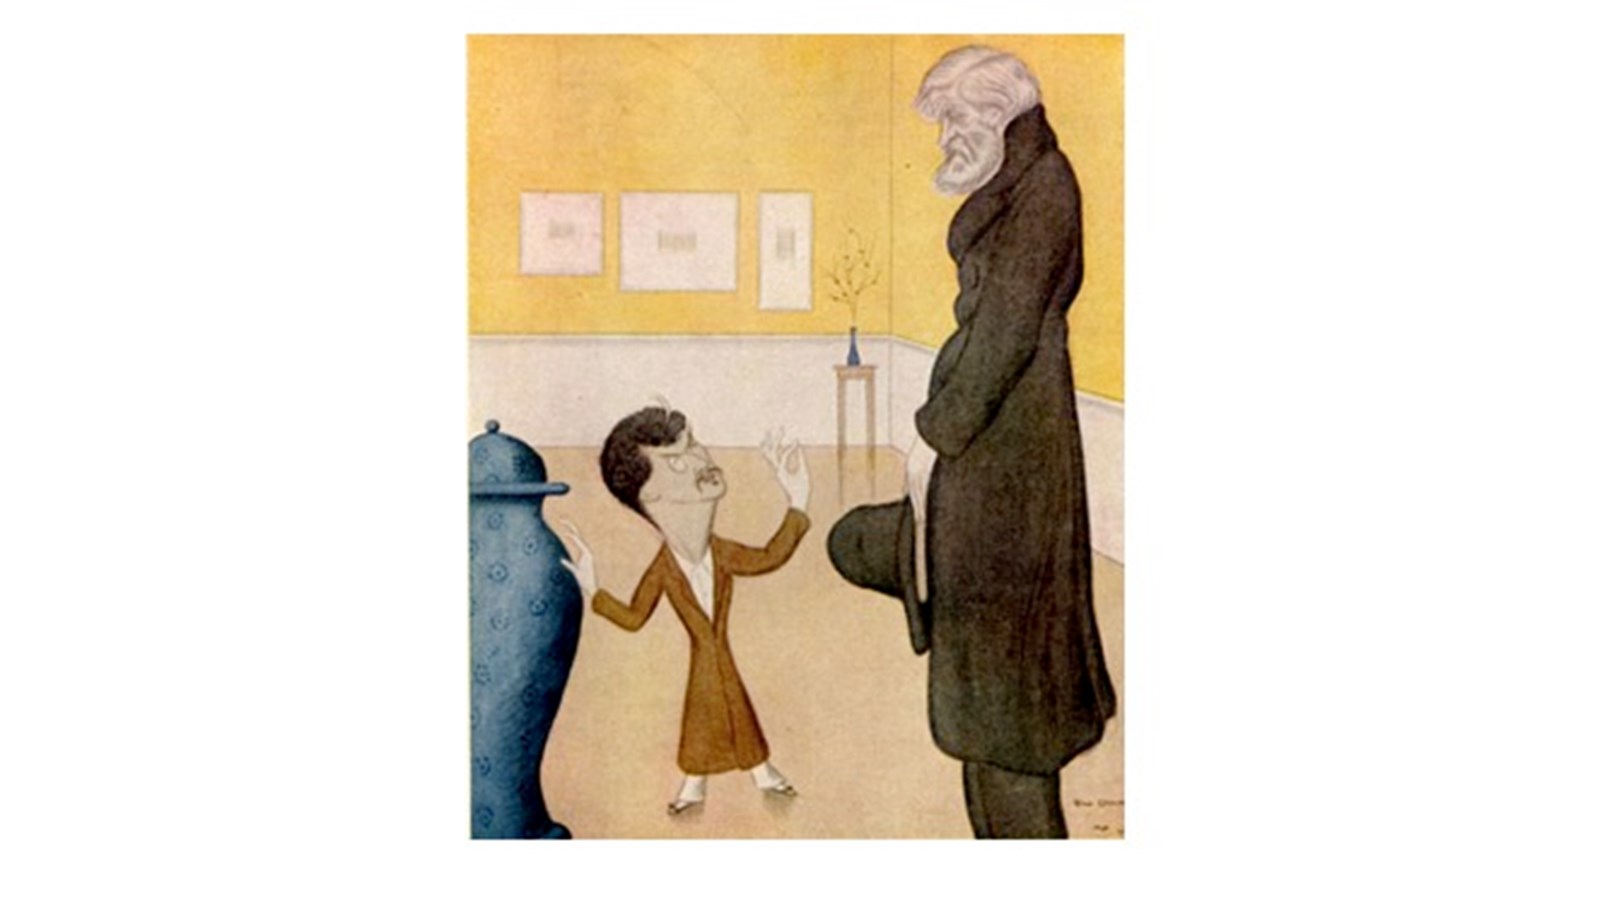 a cartoon like image of a tall darkly clothed figure looking down towards two brightly clothed people.